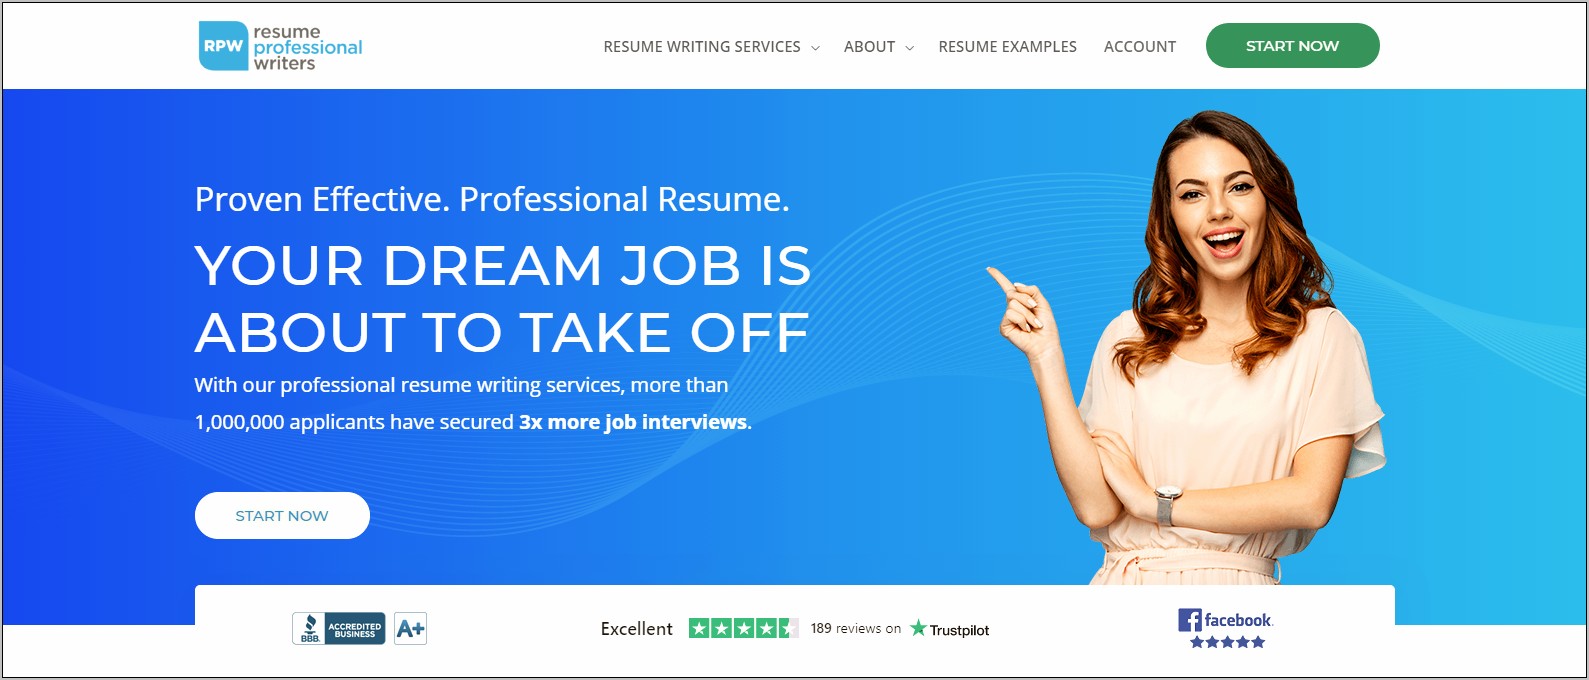 Best Places To Advertise Resume Writing Services